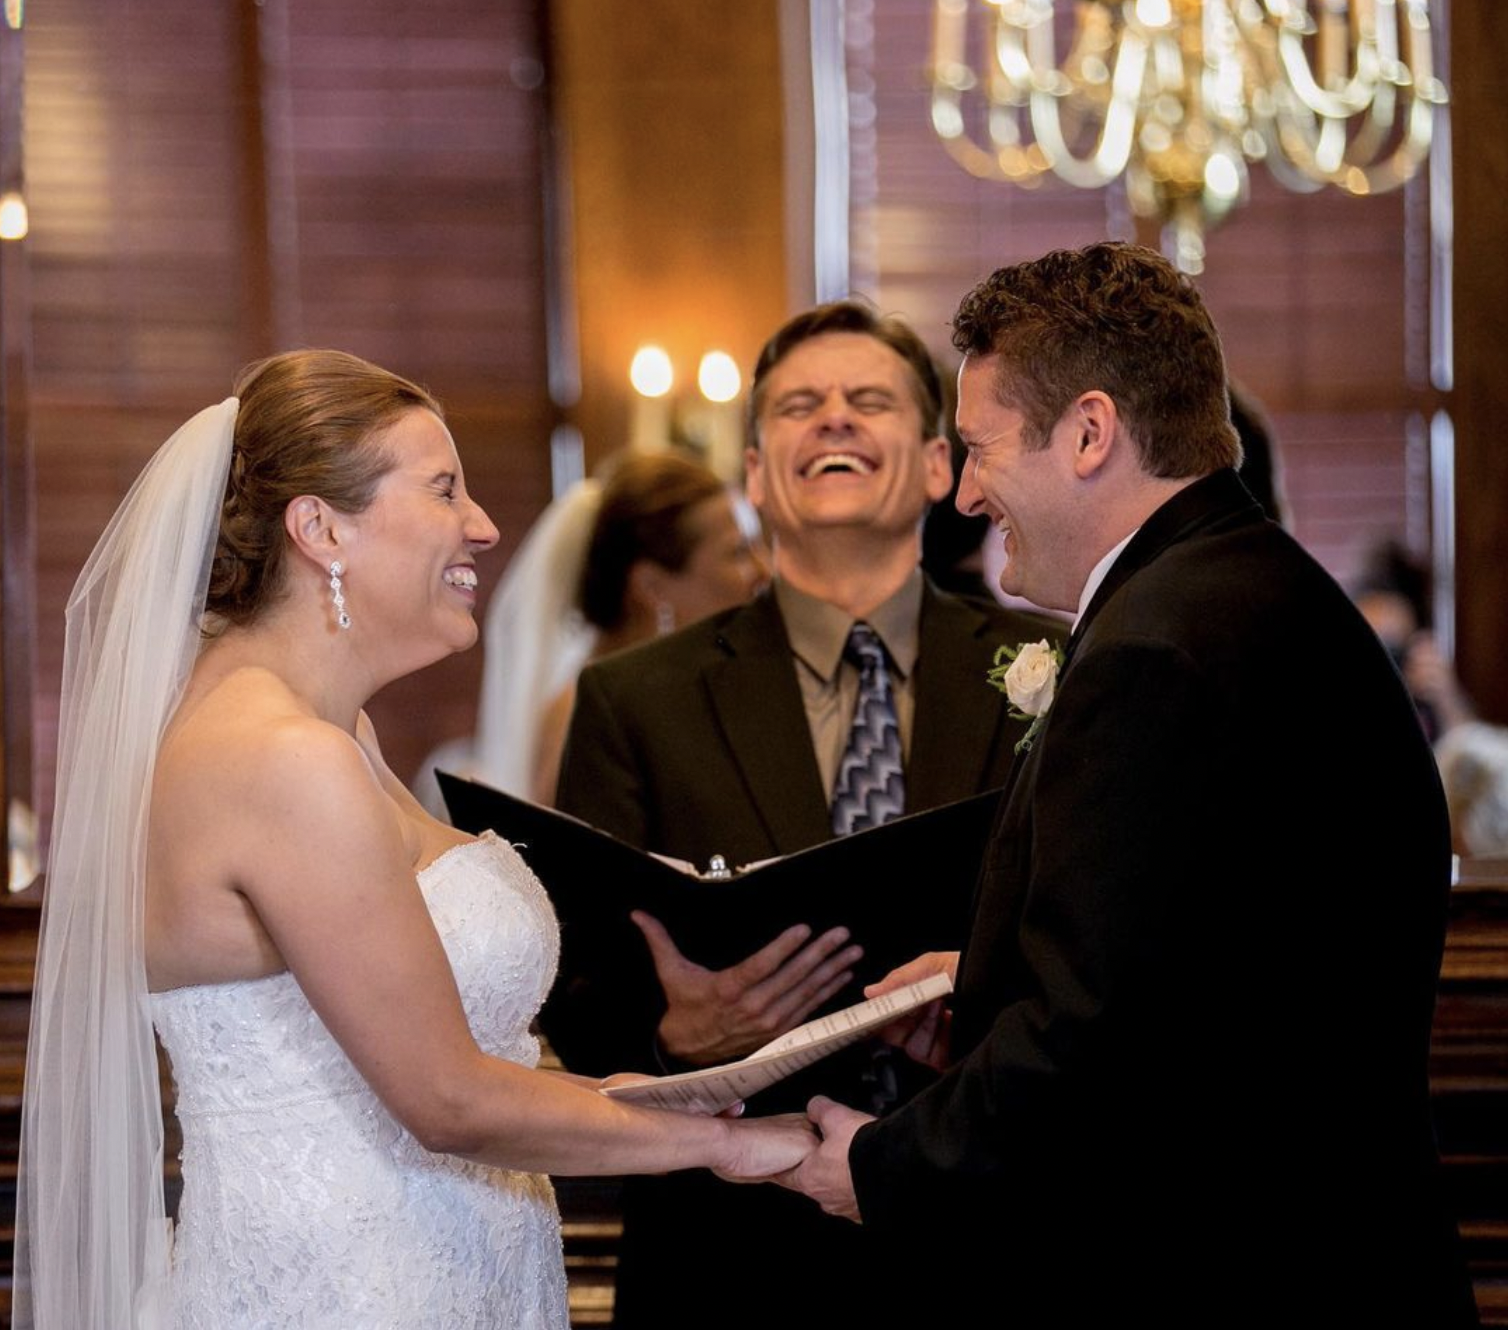 Bride, groom, and officiant laugh during wedding ceremony